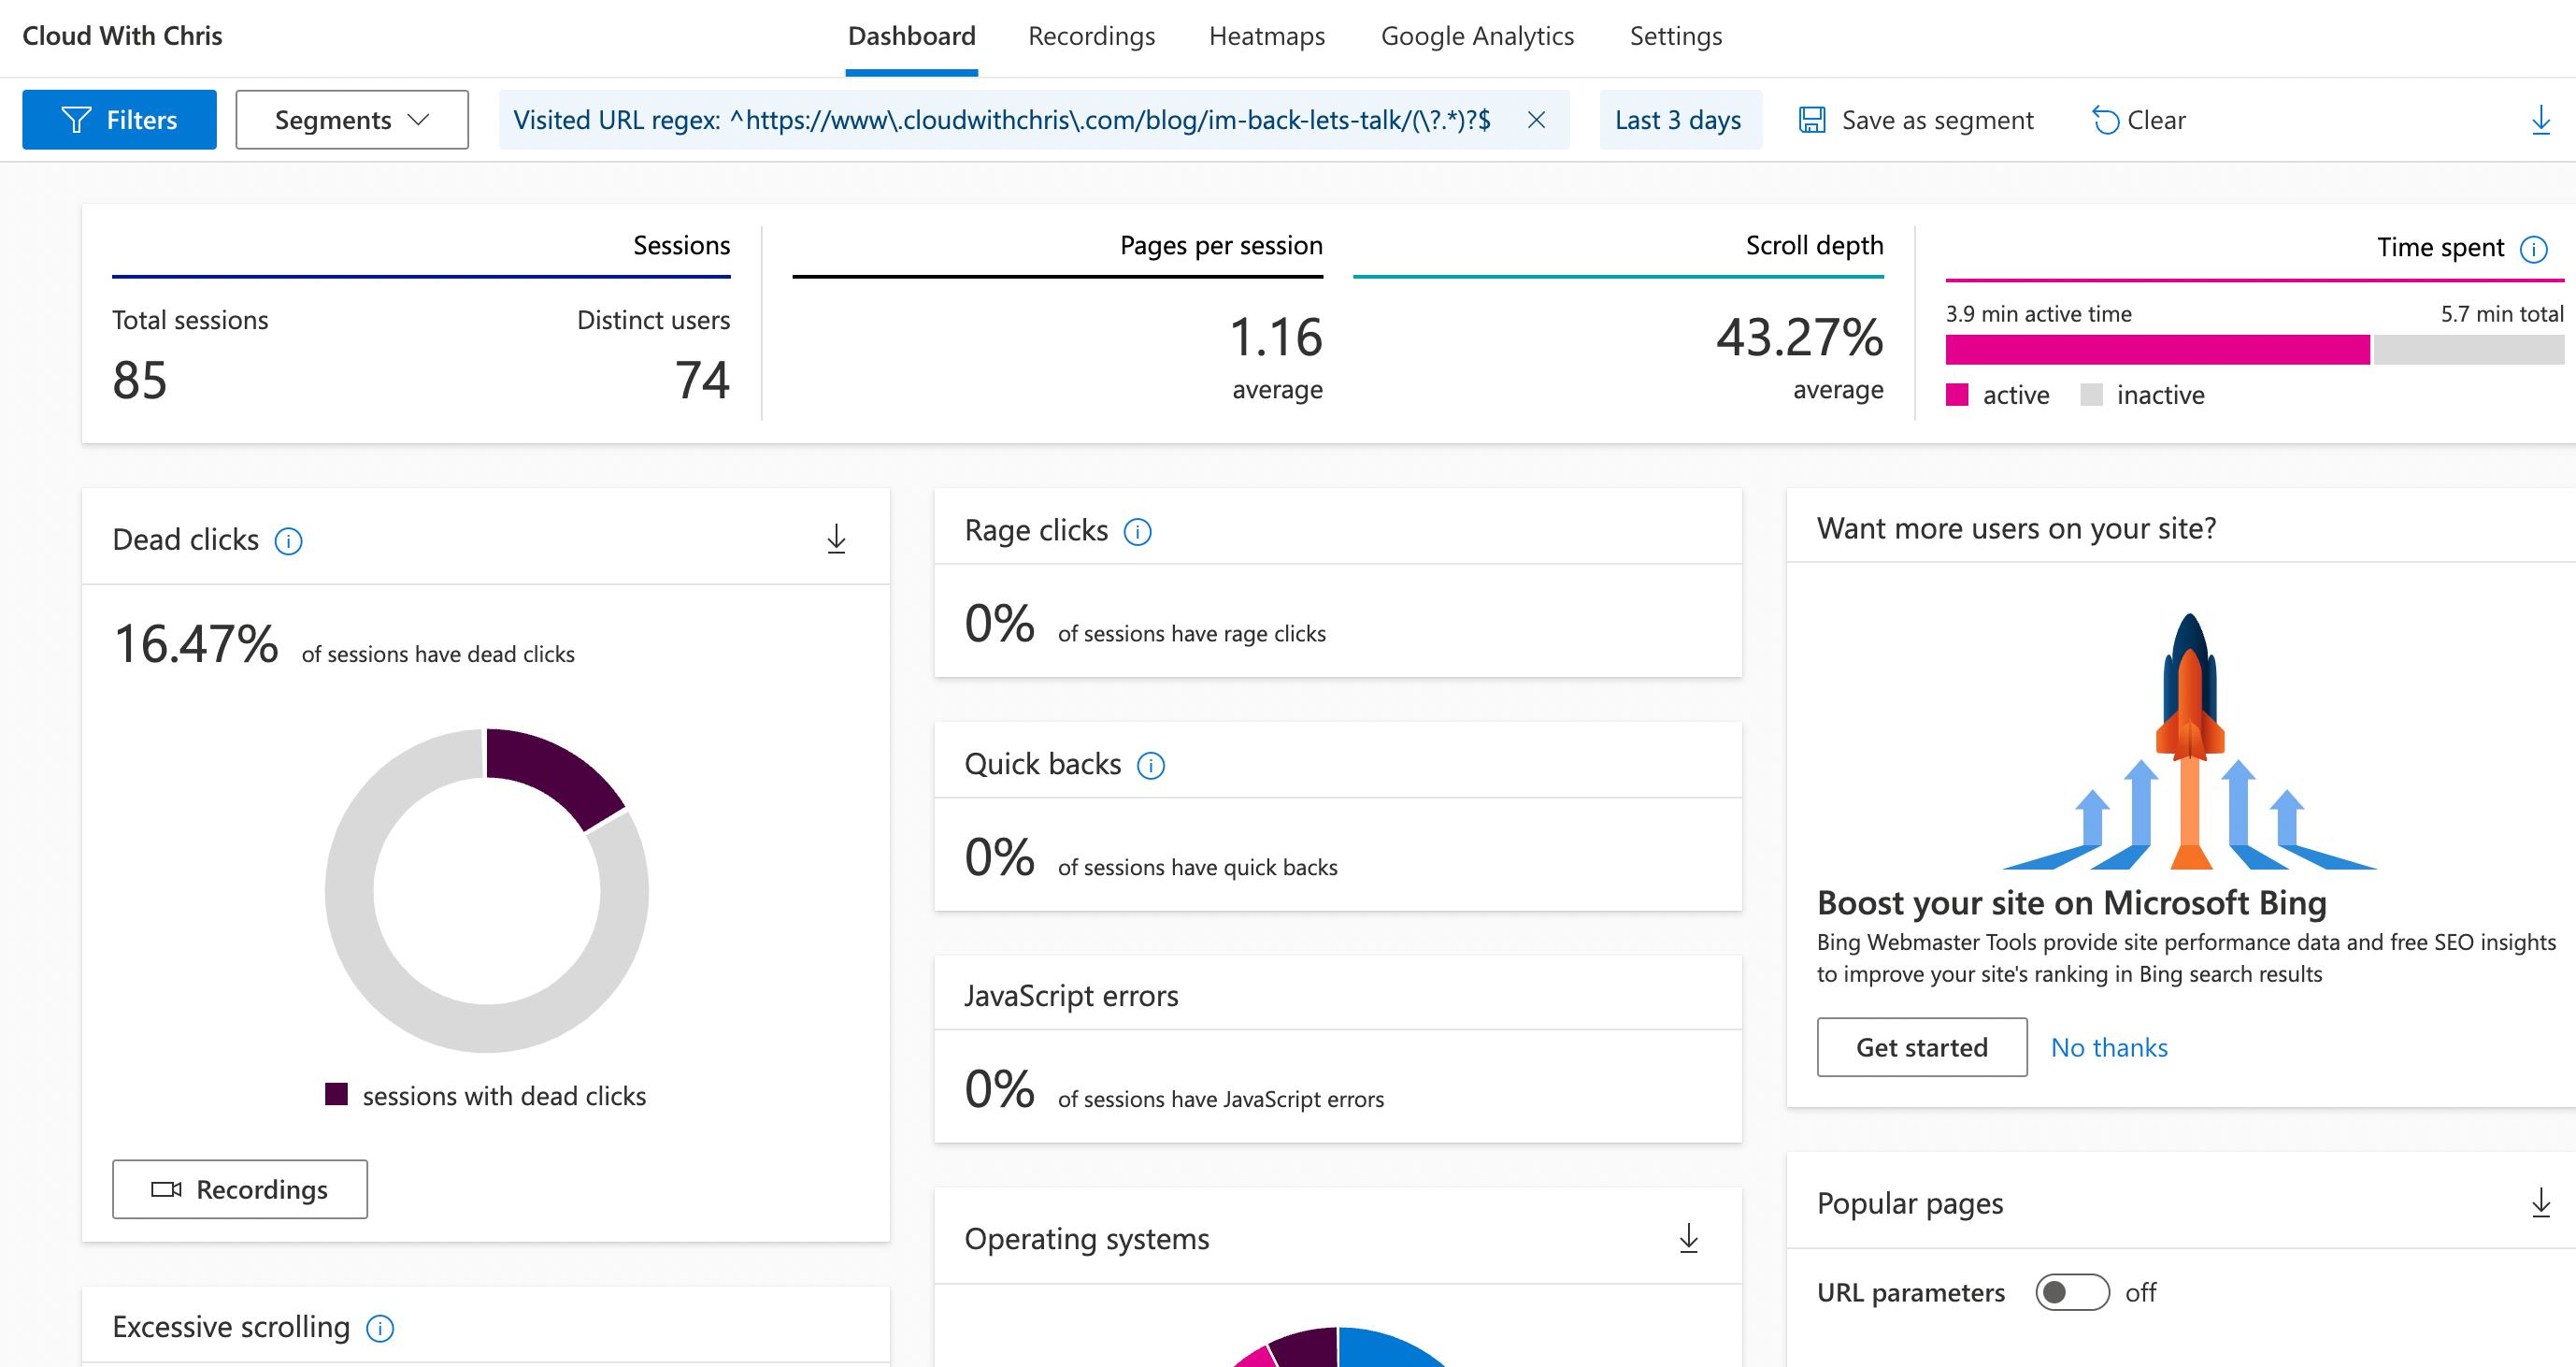 Screenshot showing insights in an overall dashboard